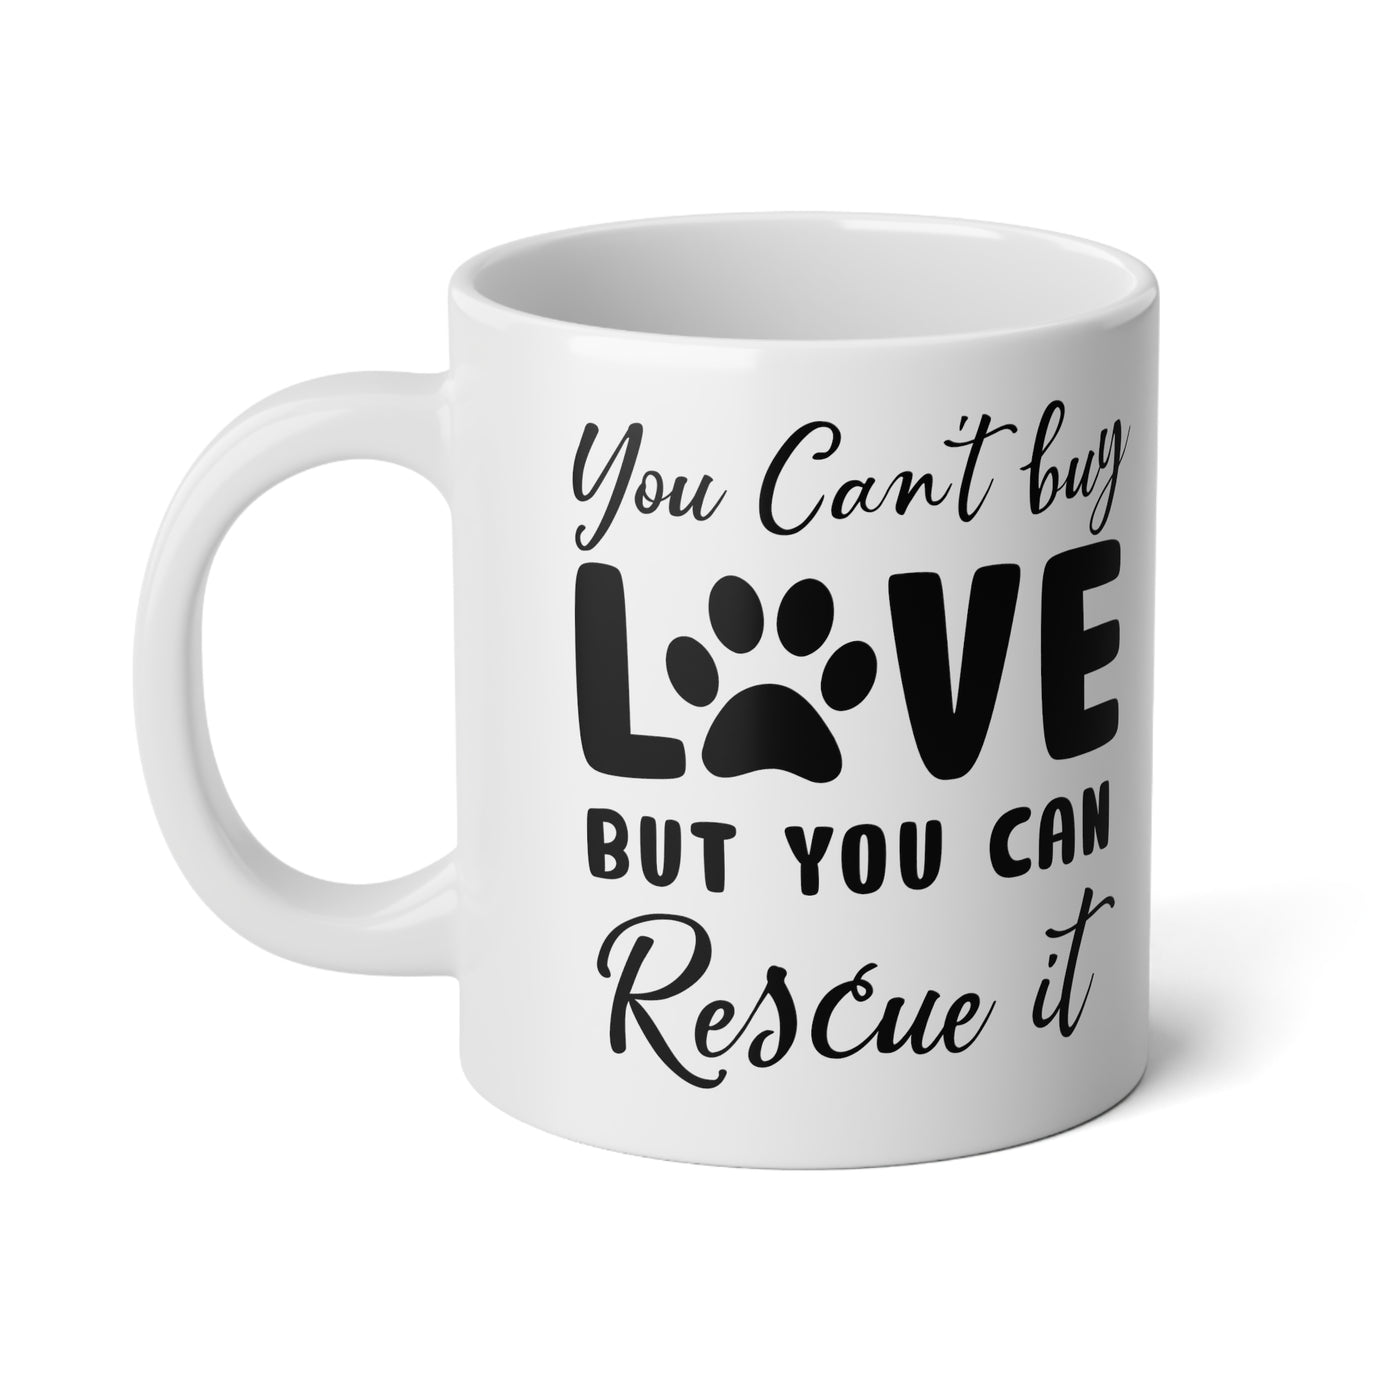 You Can't Buy Love But You Can Rescue It Mug